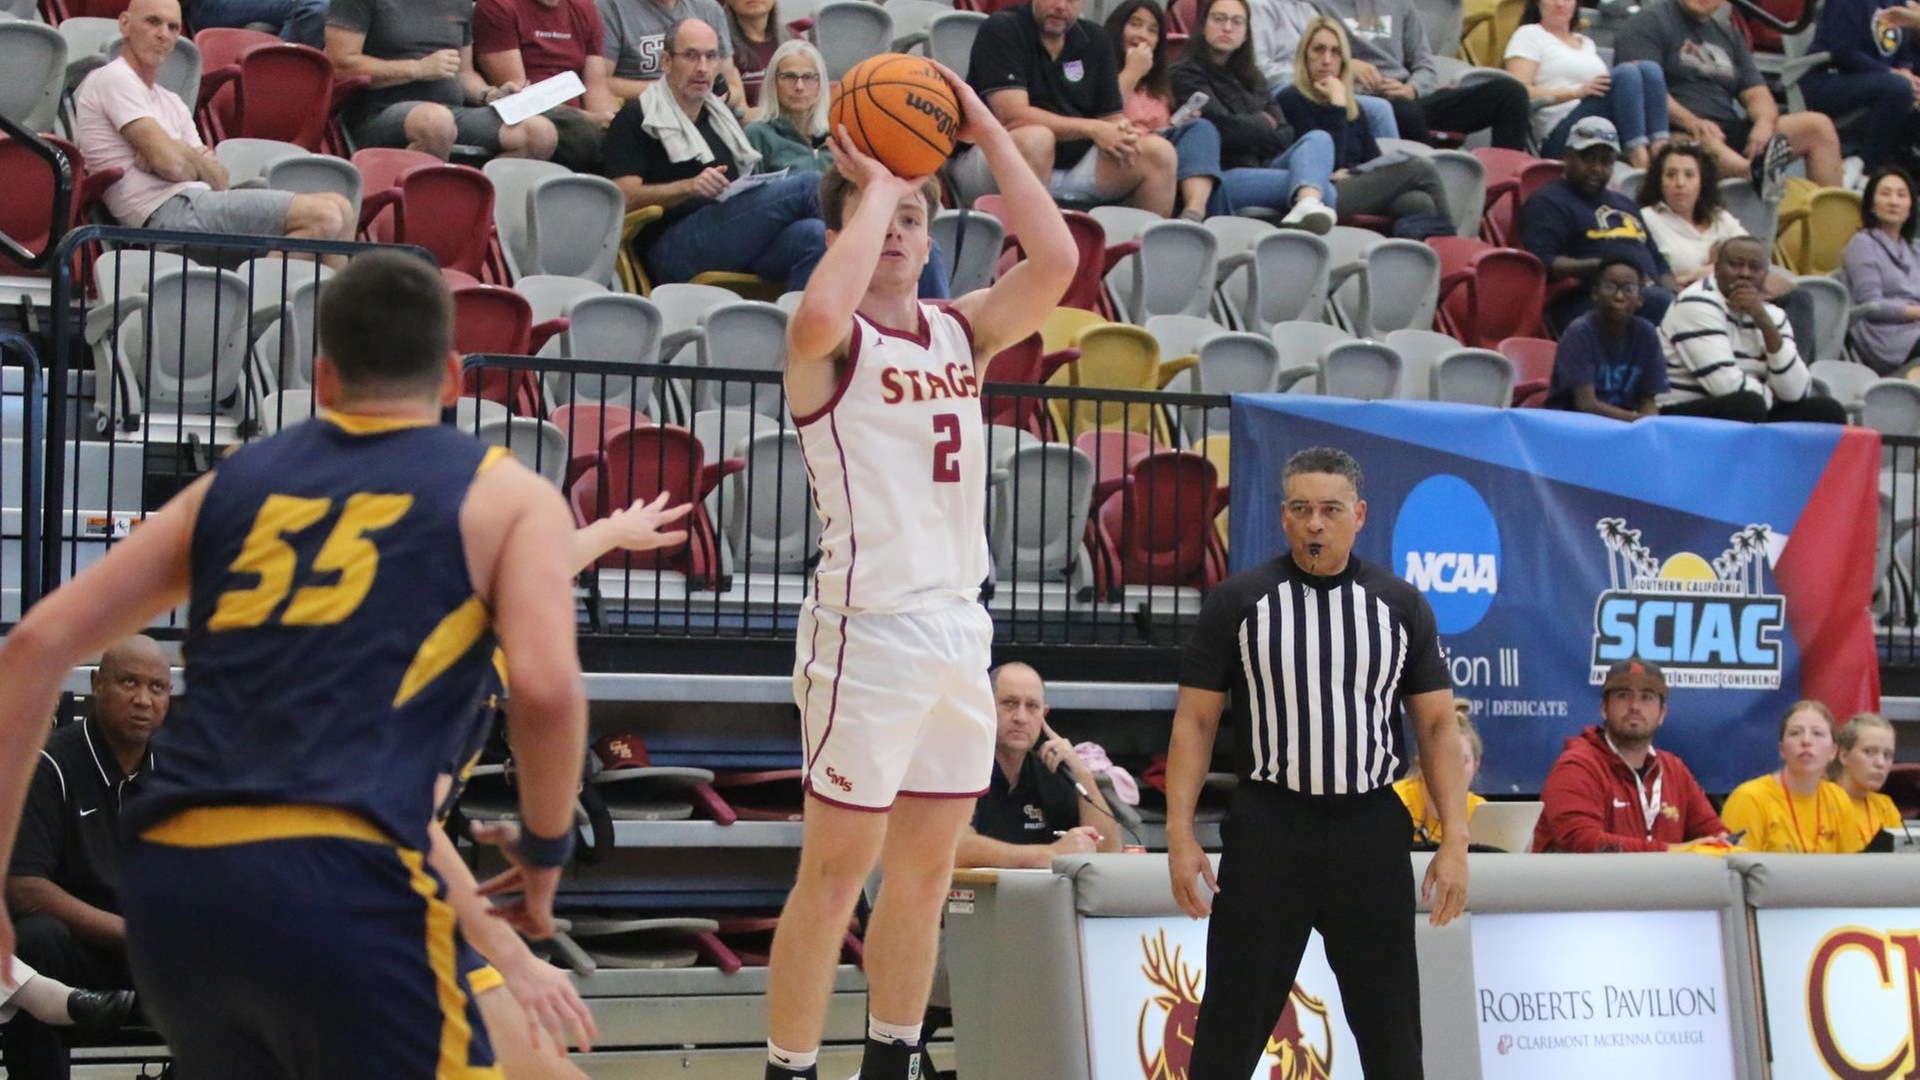 Josh Angle had 17 points for the Stags (photo by Ali McEachern)